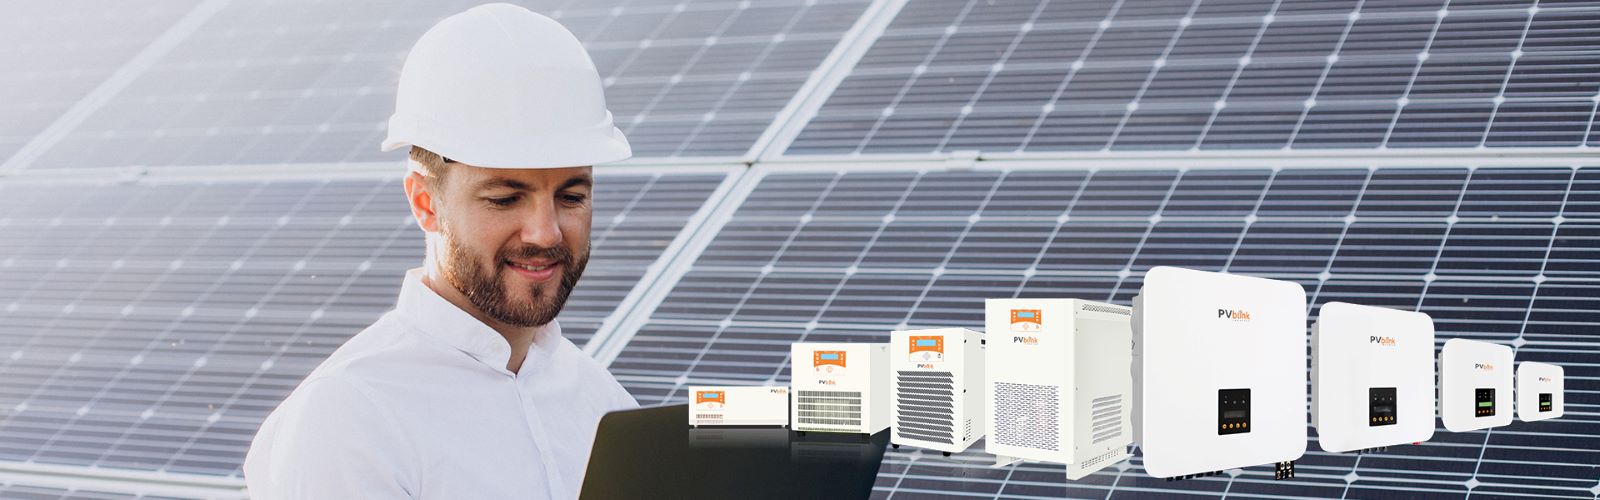  Power Your Solar System with the Best PVblink Solar Inverter Company